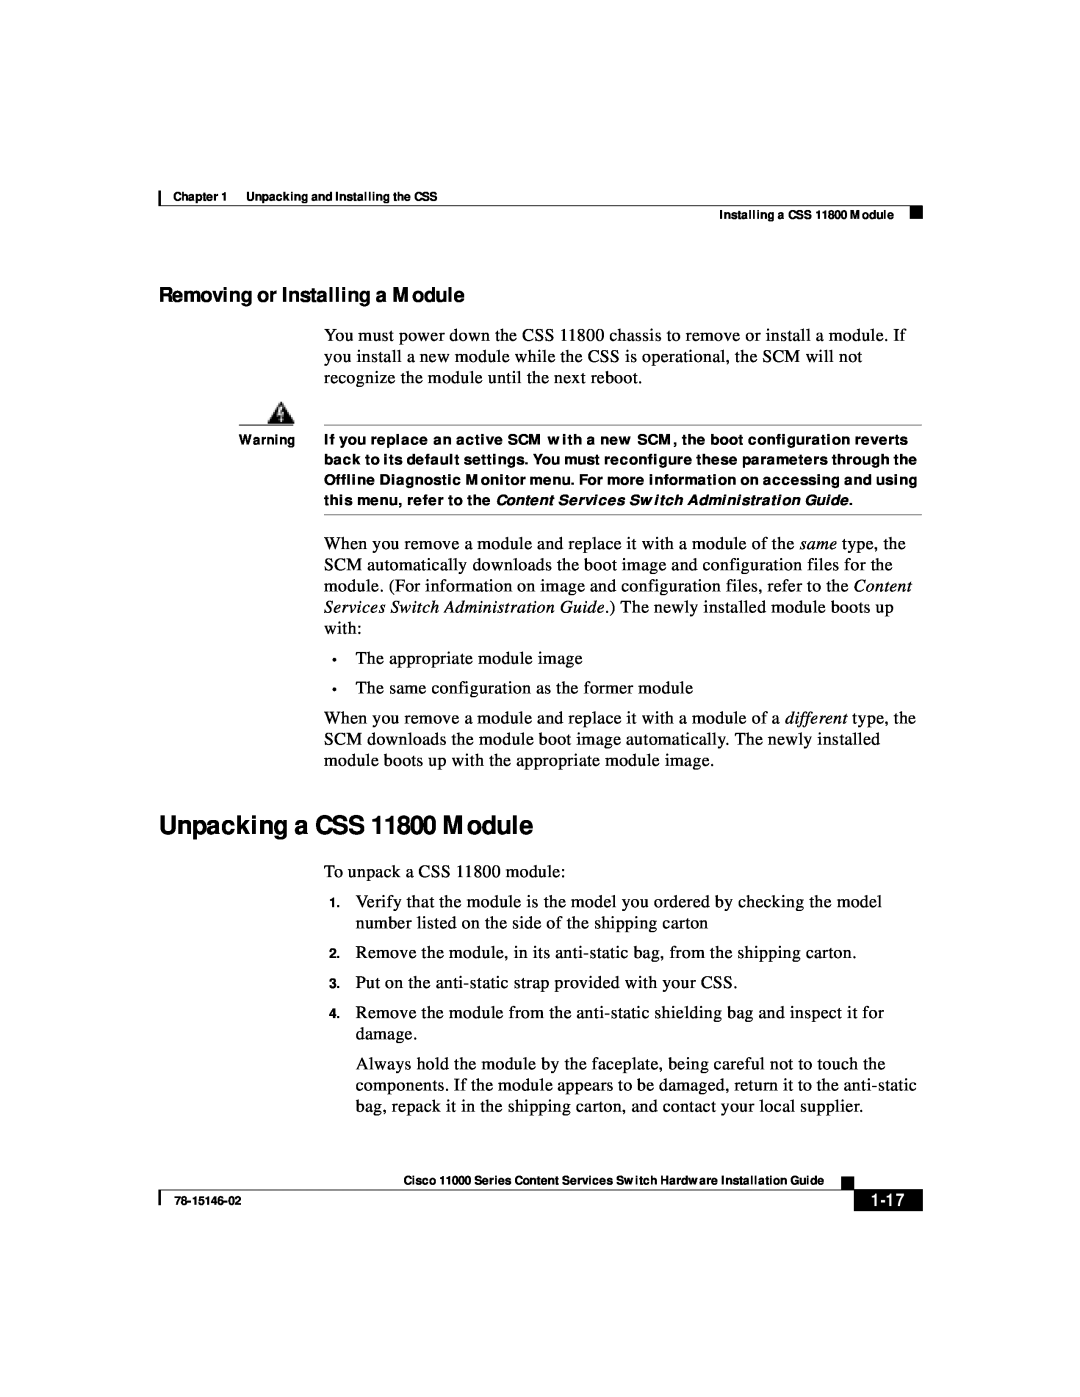 Cisco Systems 11000 Series manual Unpacking a CSS 11800 Module, Removing or Installing a Module, 1-17 